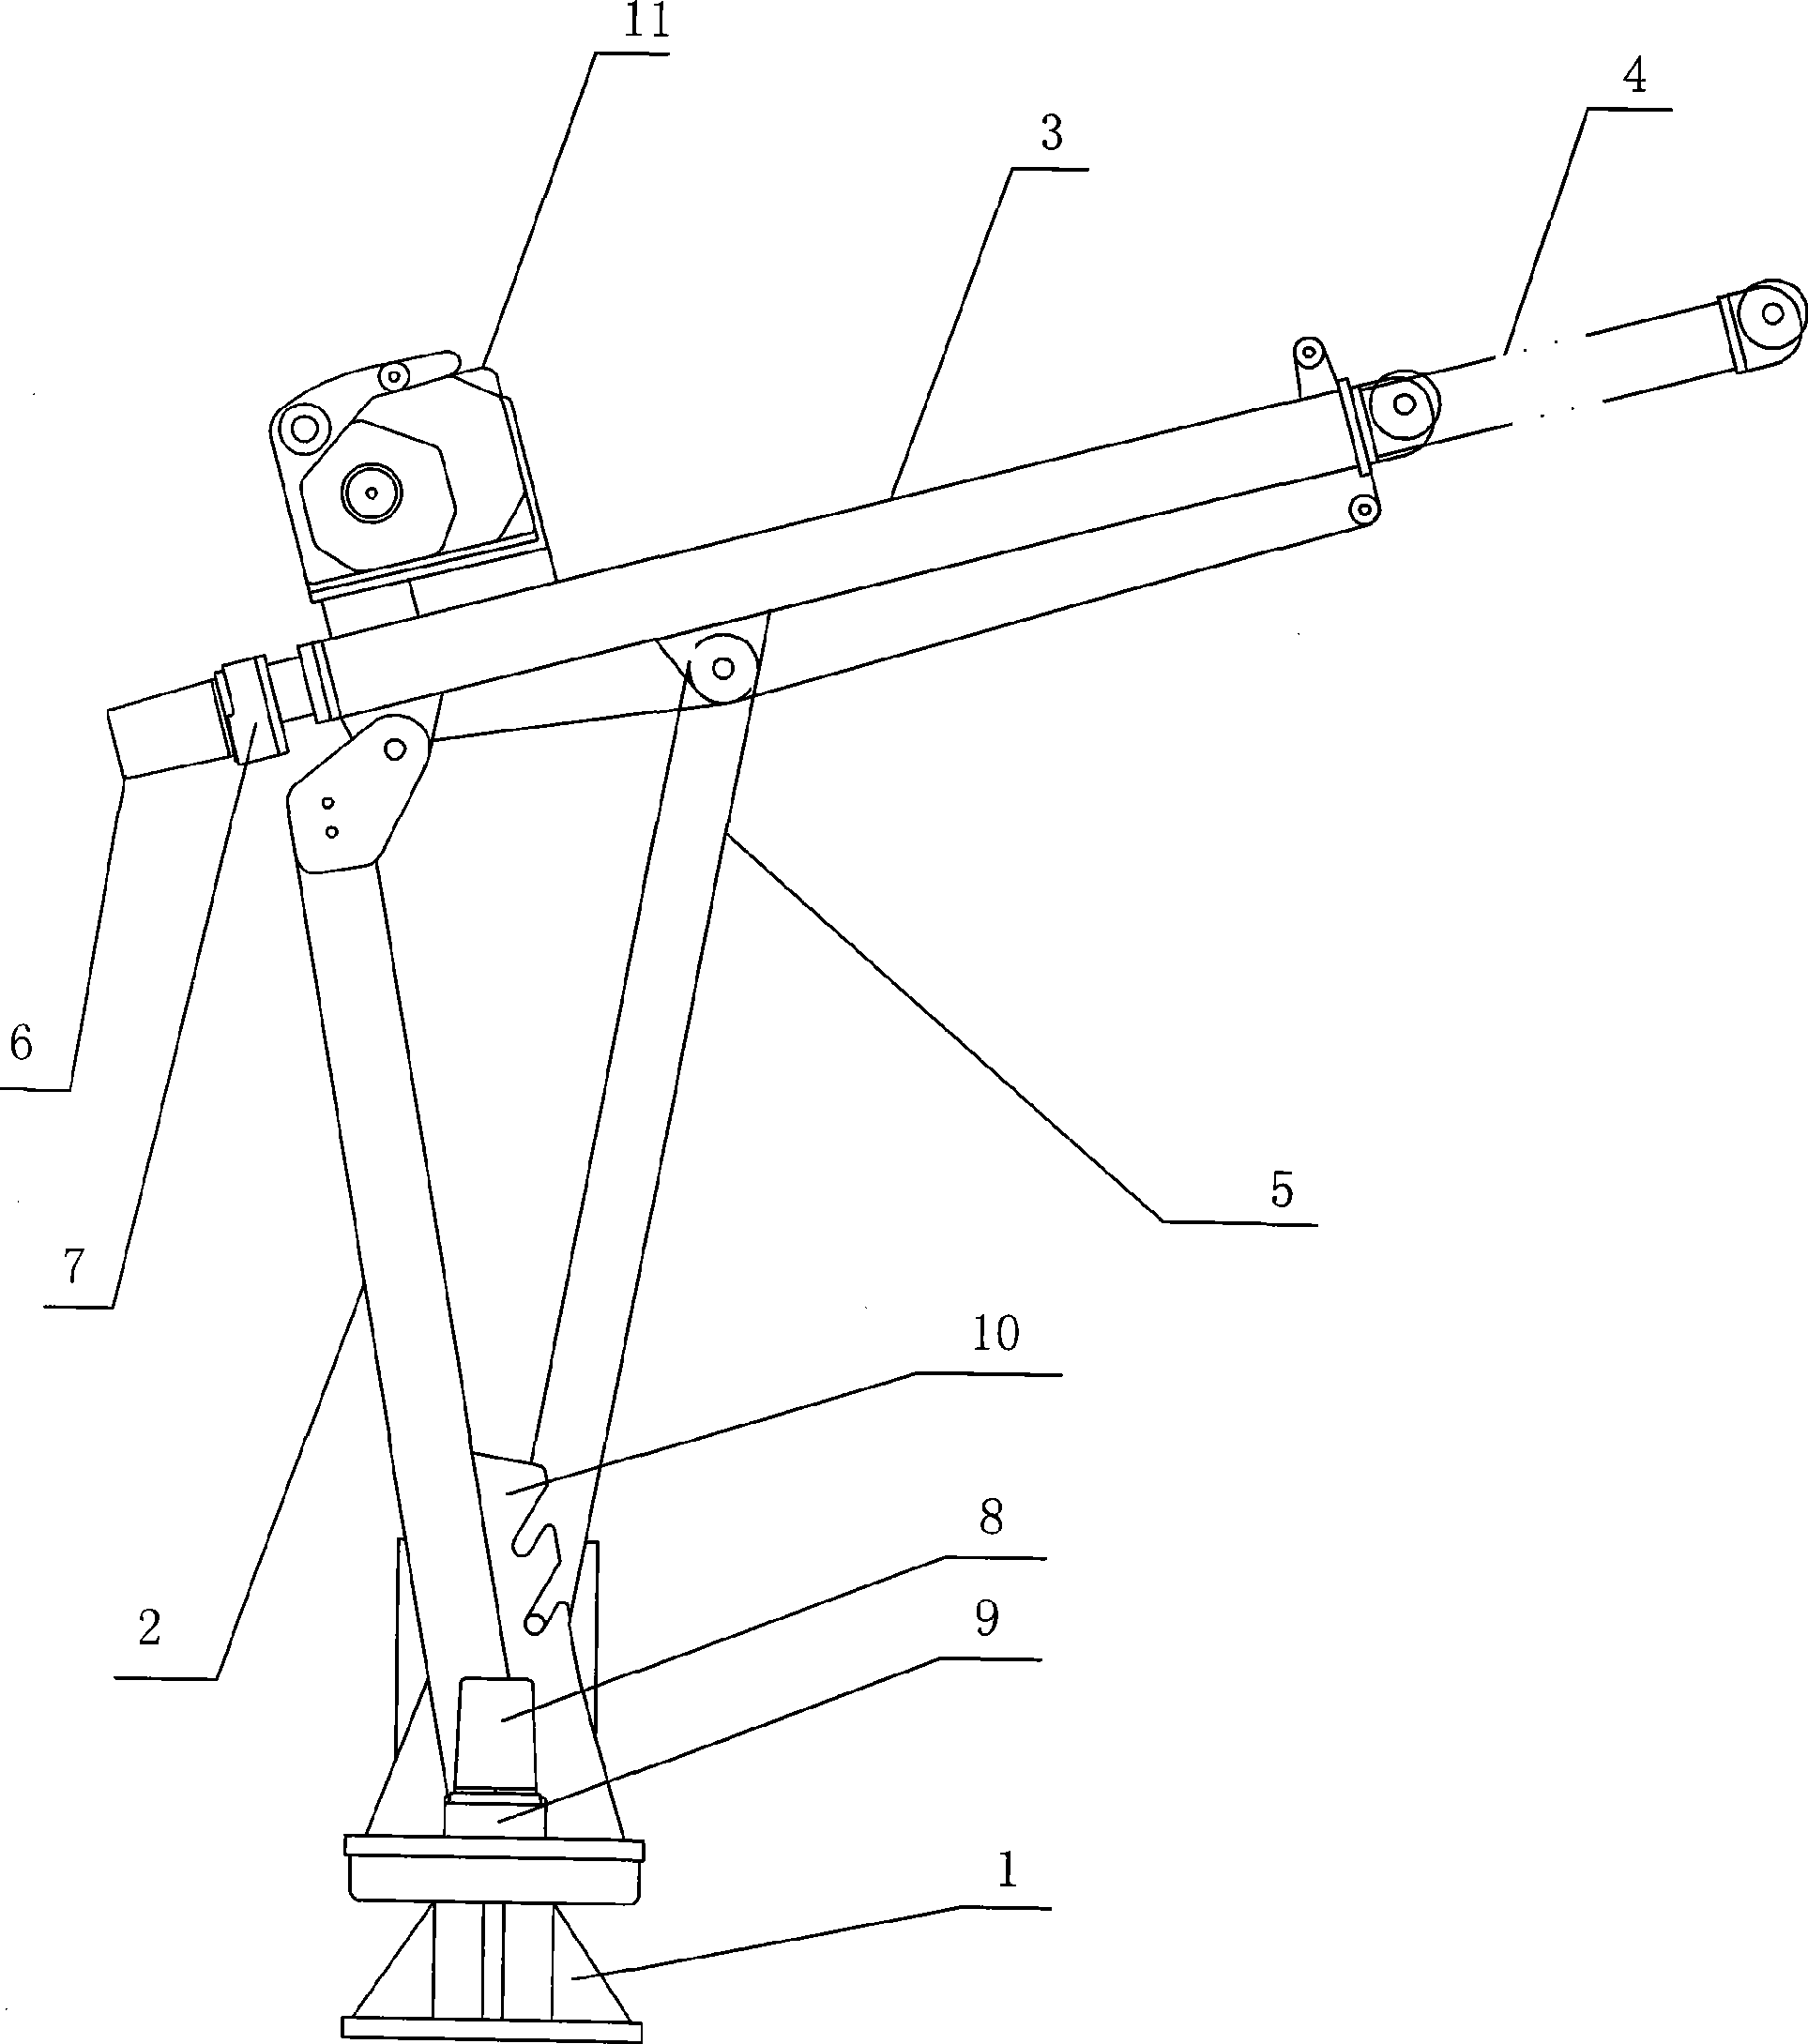 Electric lifting device